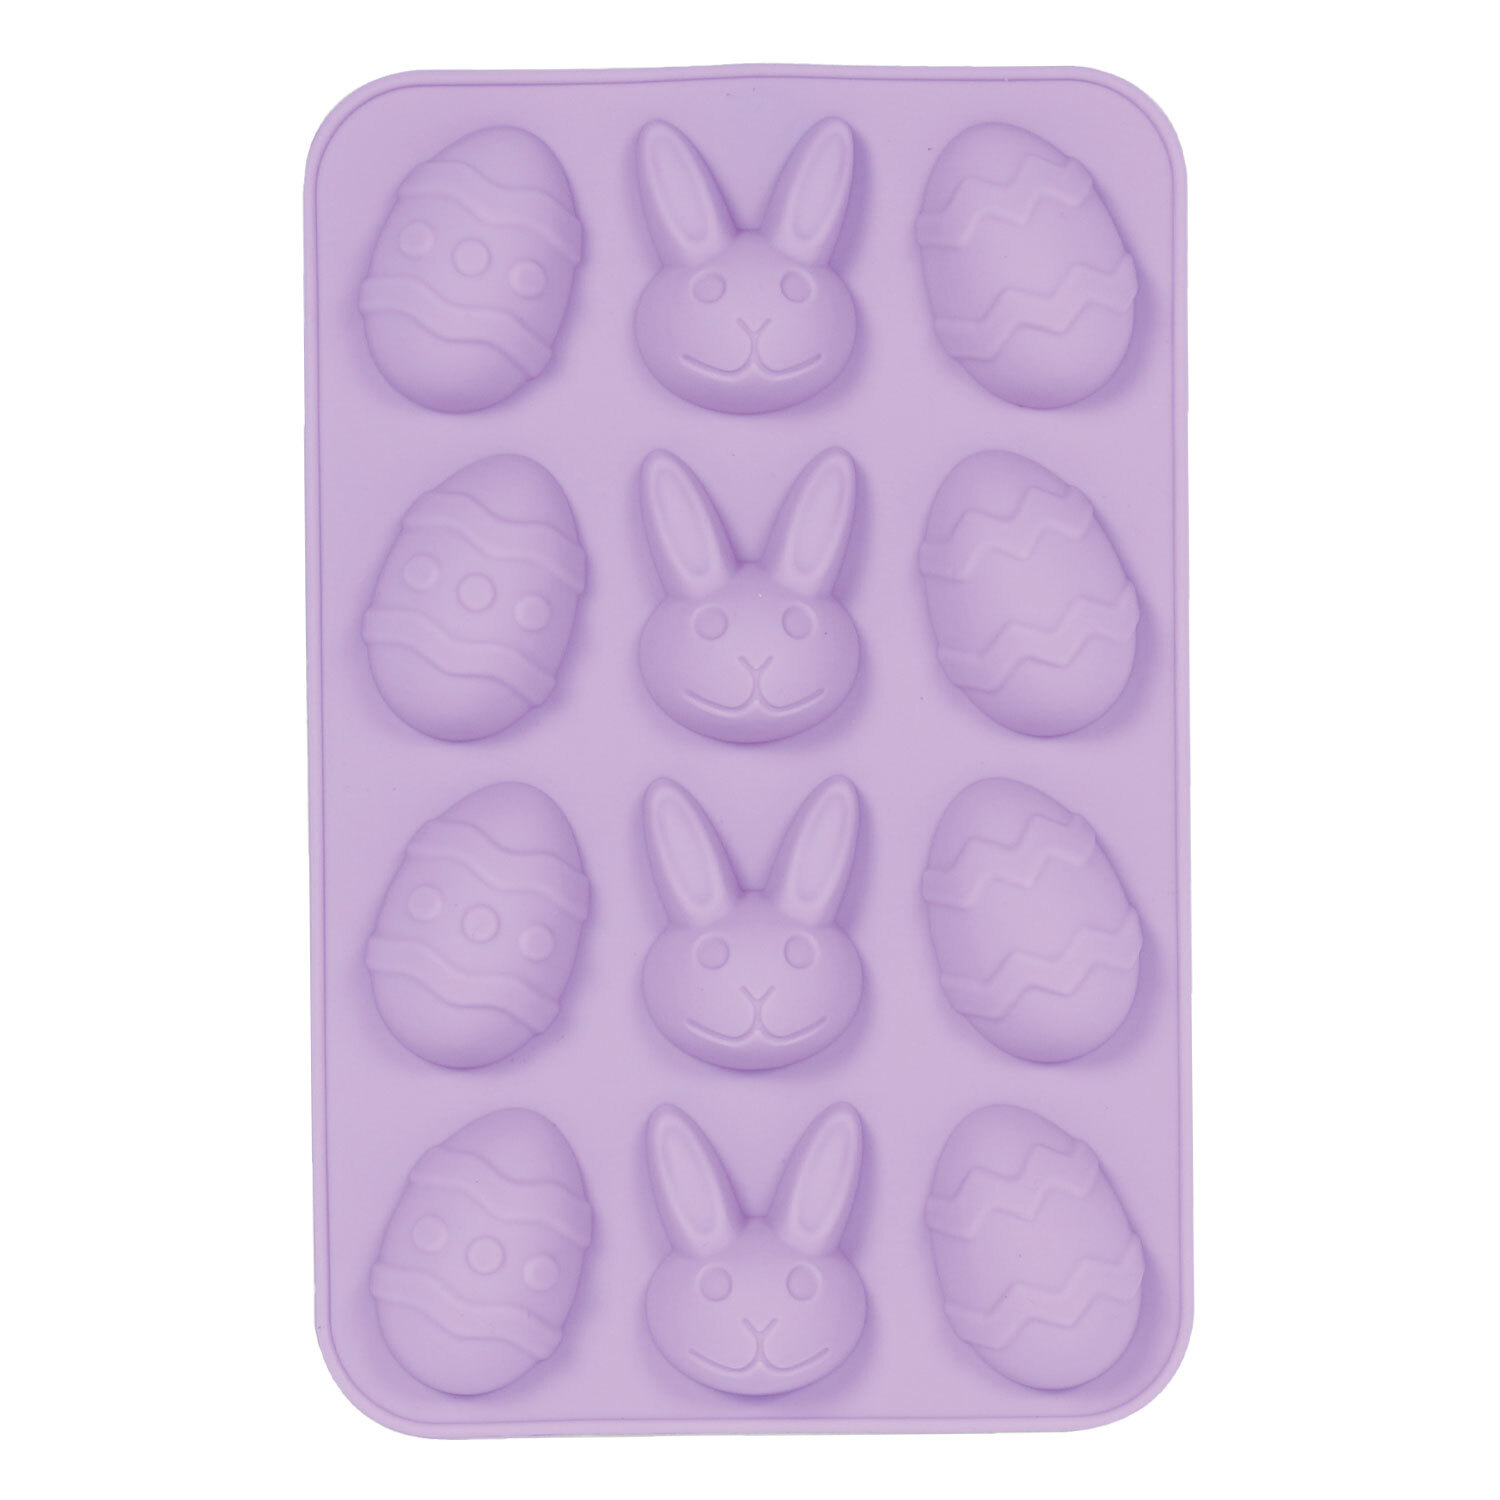 Single Bunny and Egg Silicone Mould in Assorted styles Image 2